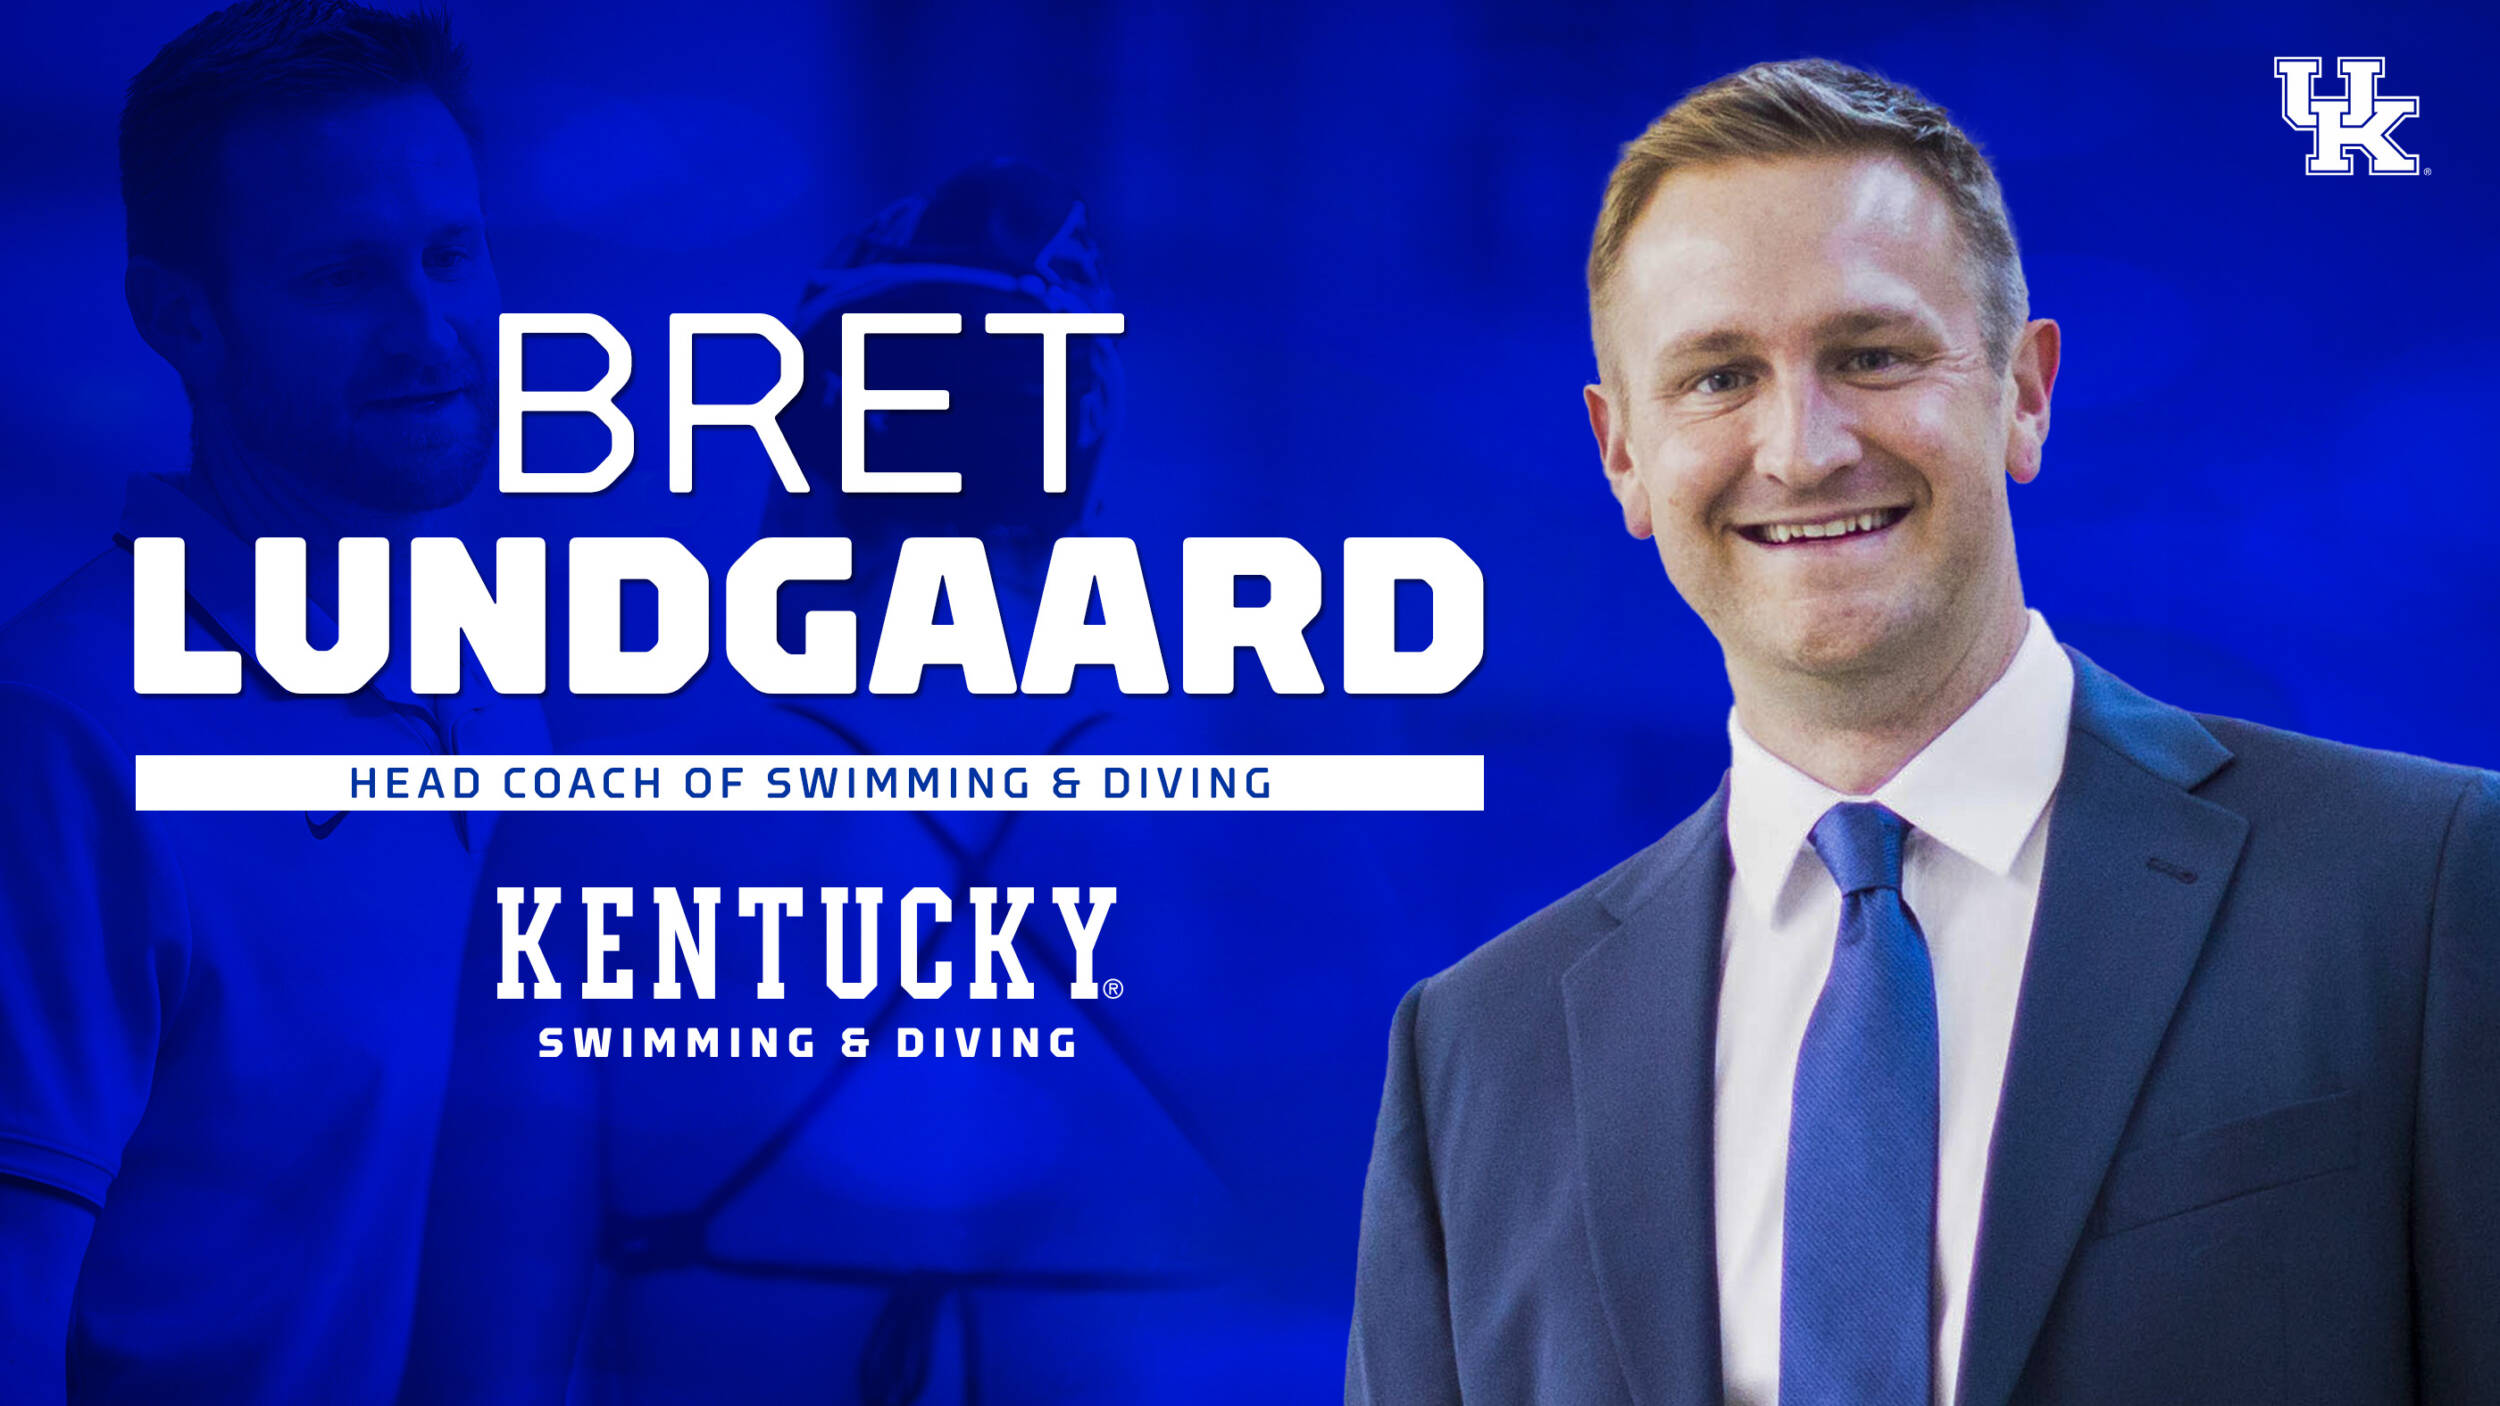 Bret Lundgaard Named Head Coach of Kentucky Swimming & Diving